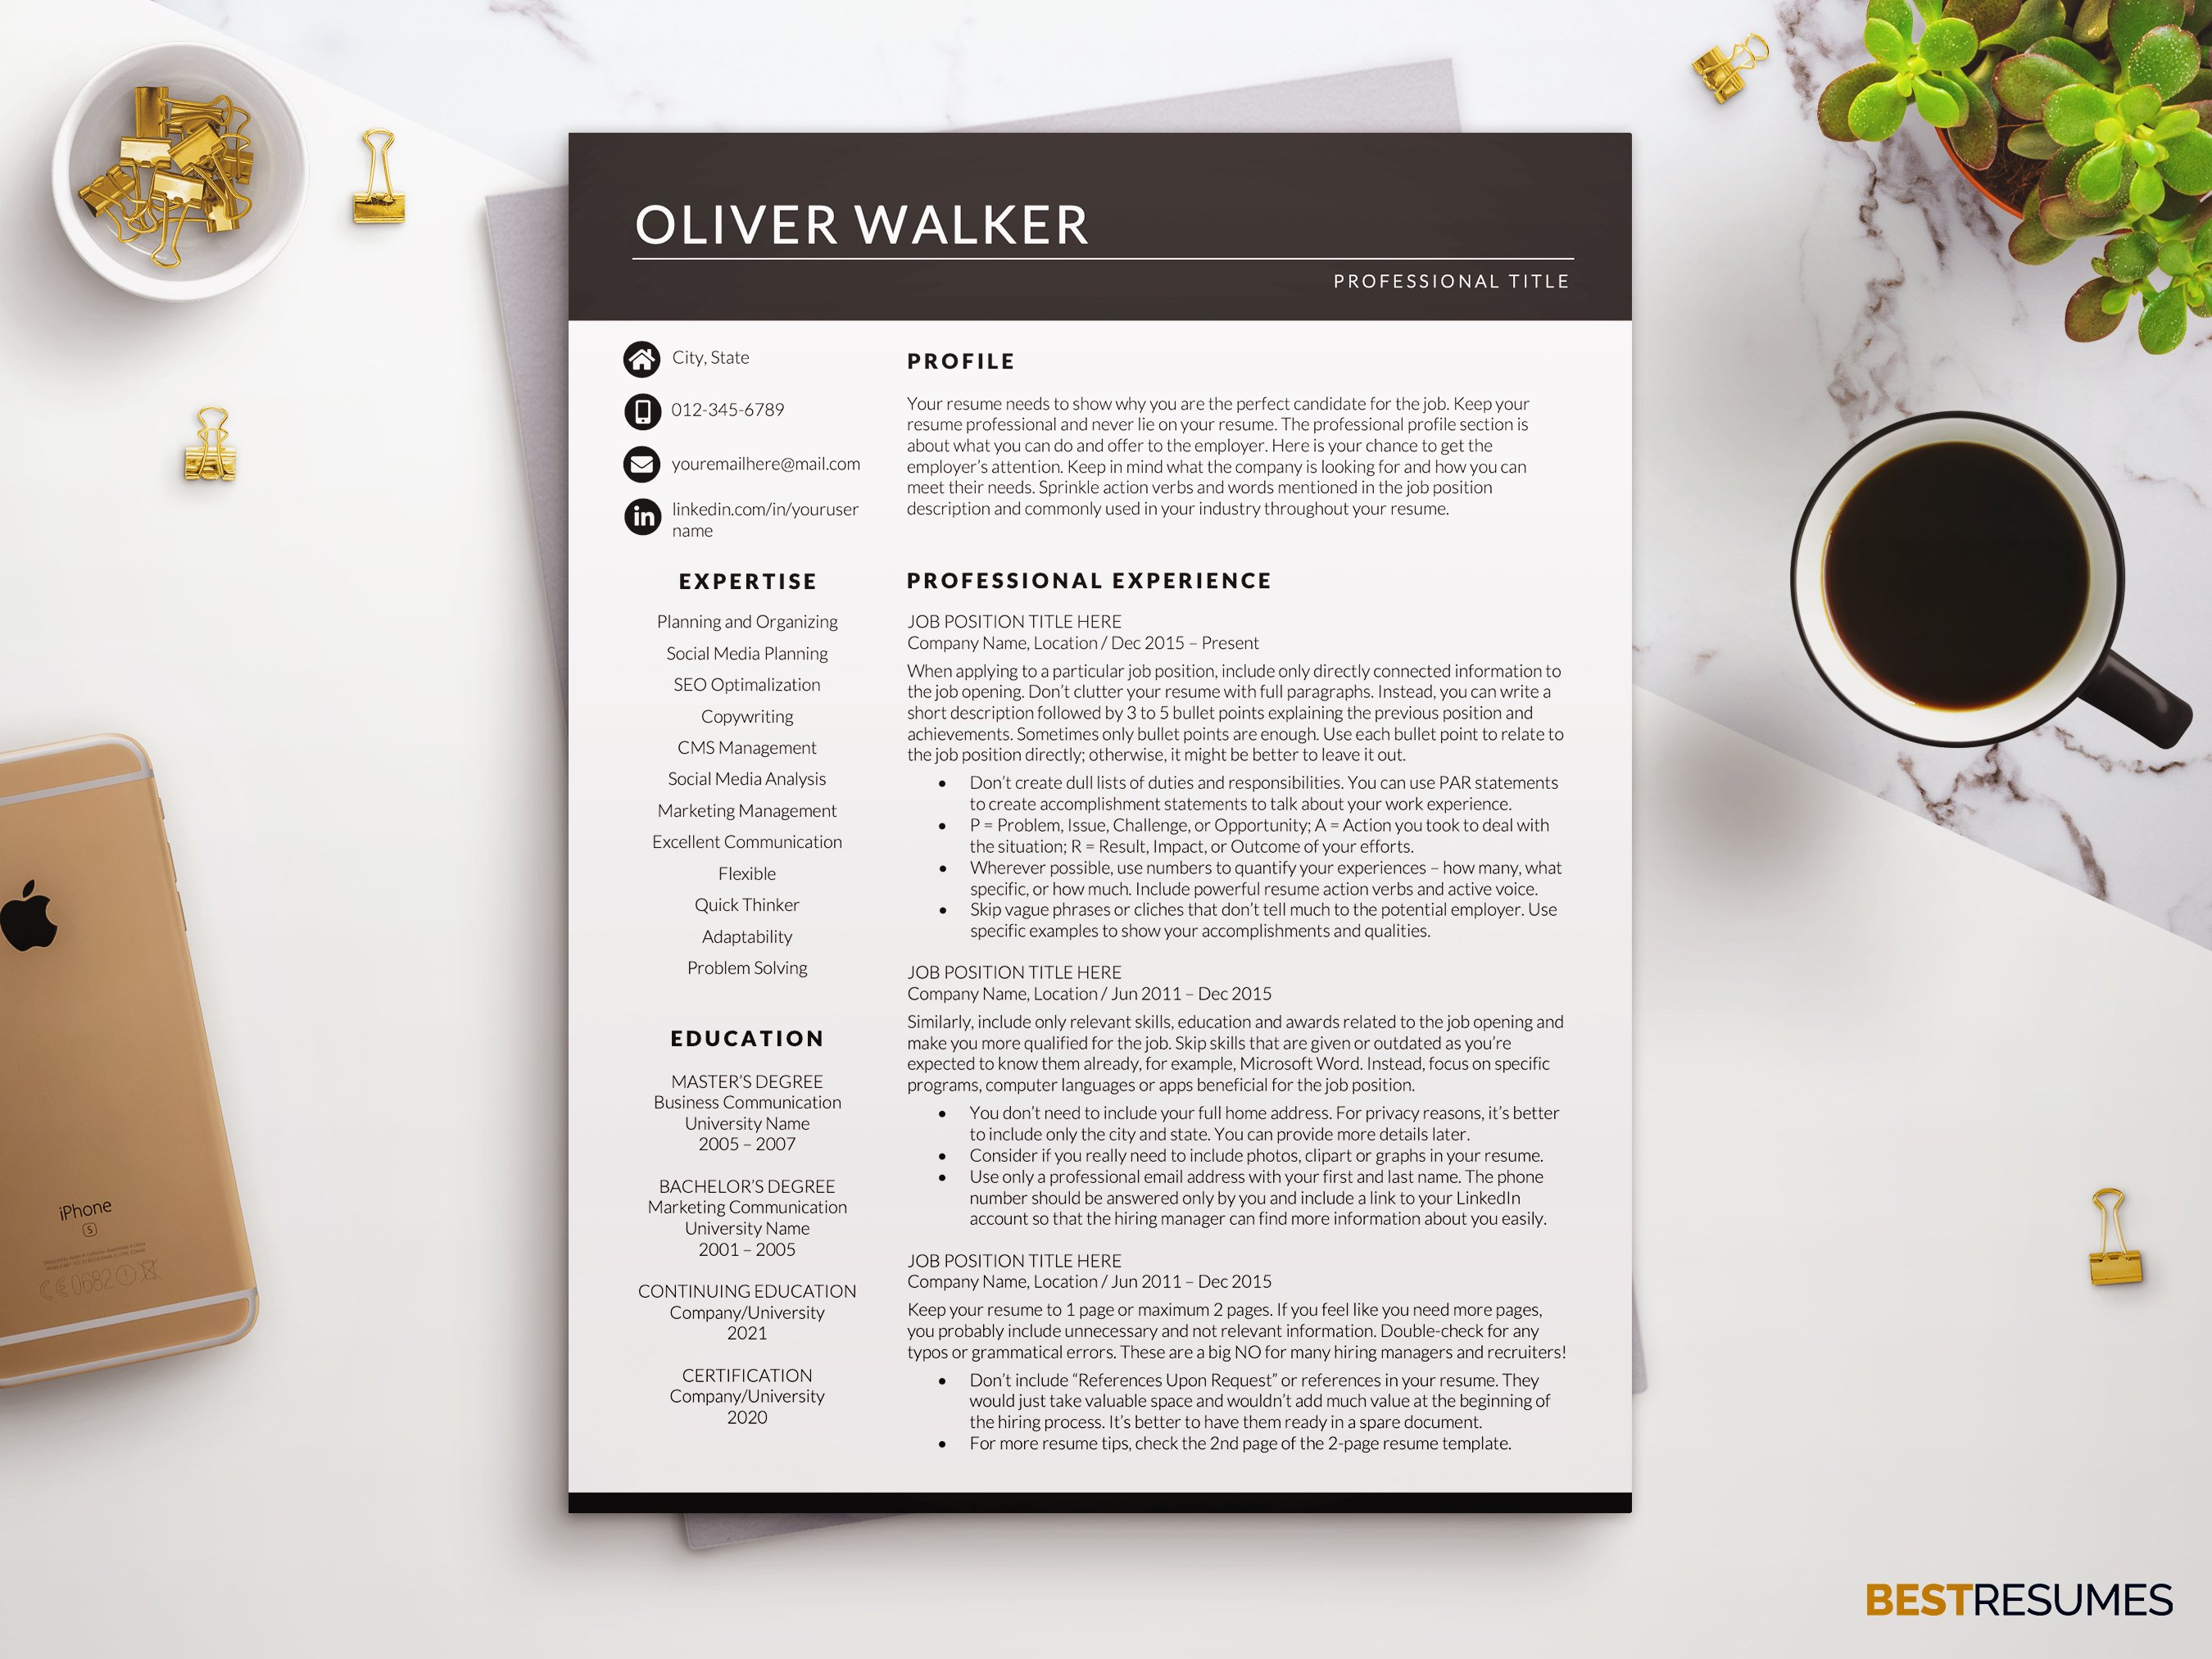 Business Resume CV Template cover image.